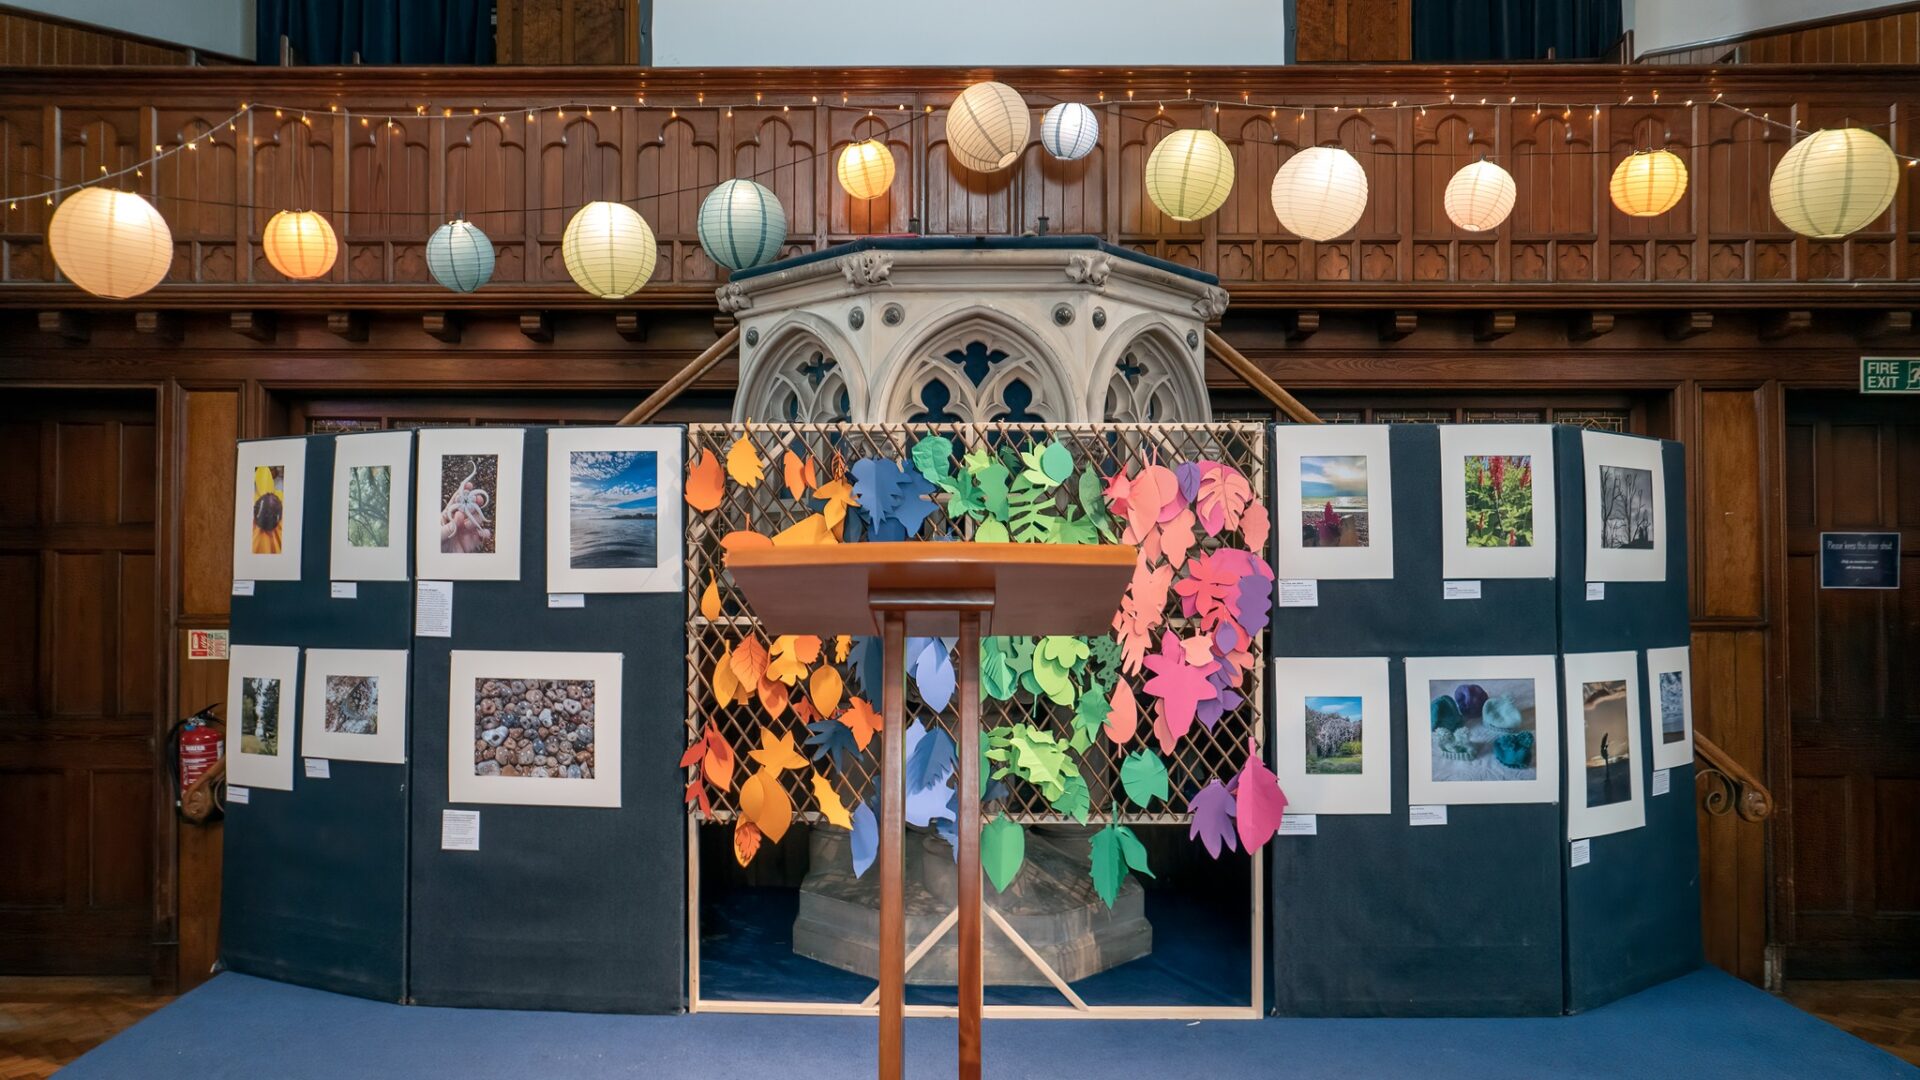 Photographic display on pulpit